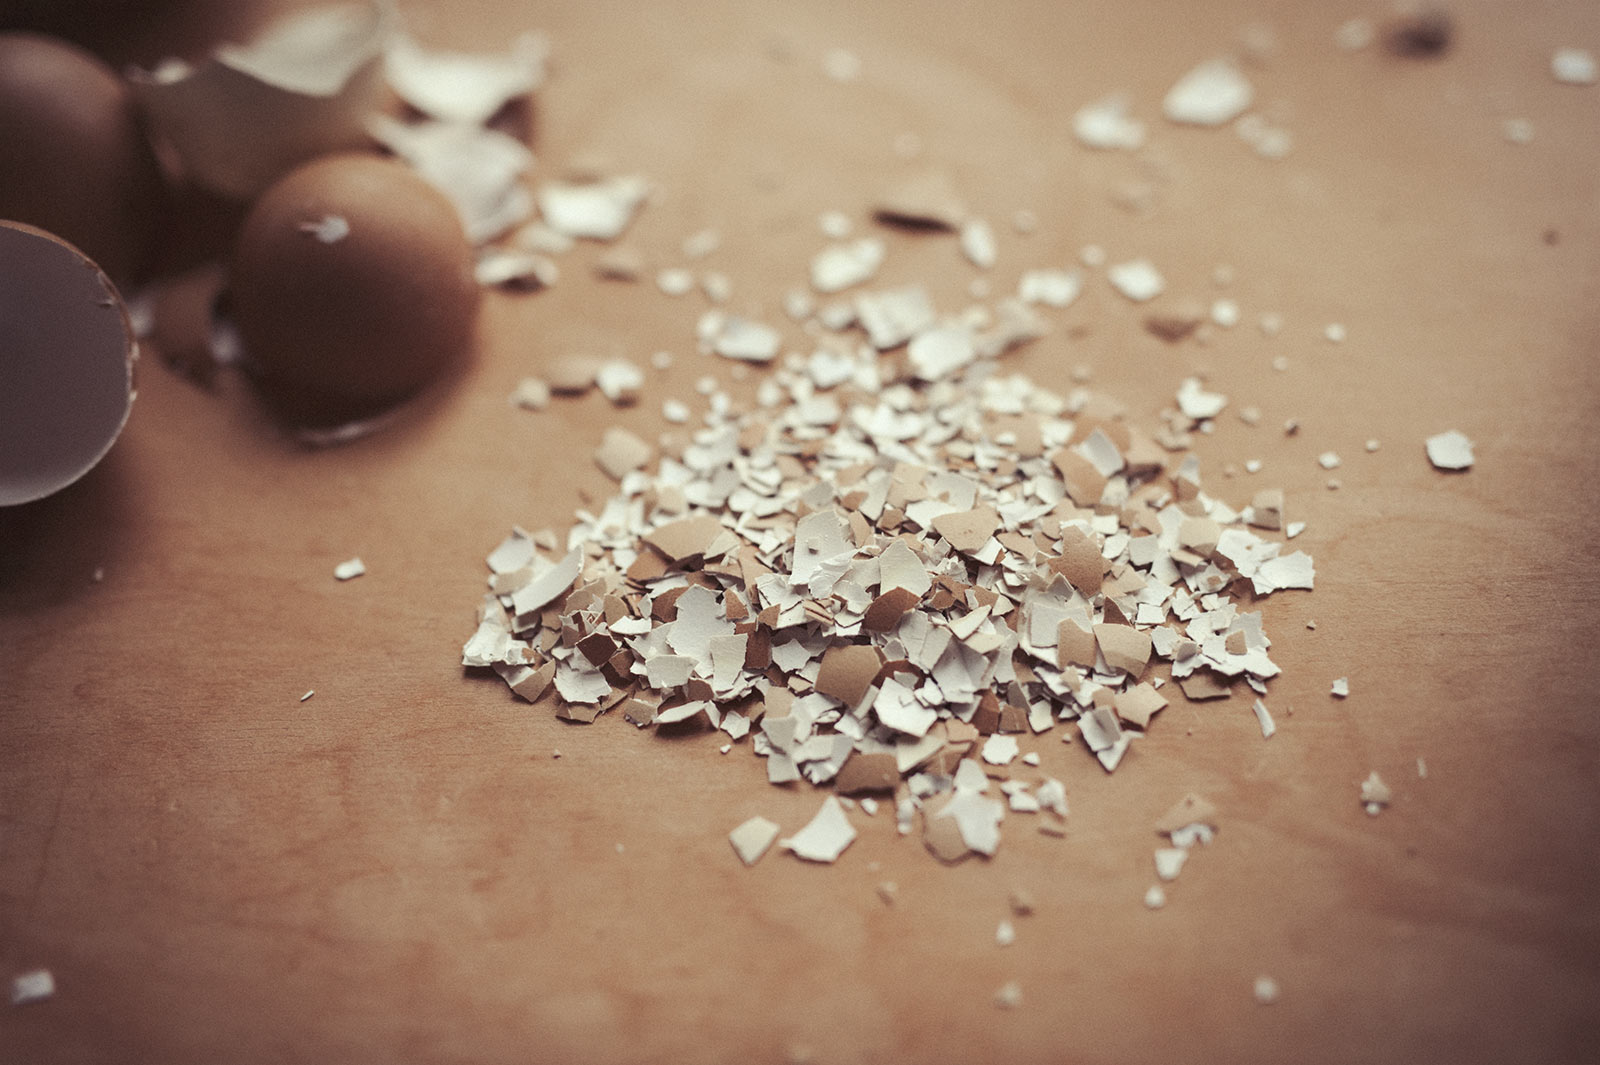 Crushed egg shells are displayed next to intact egg shells